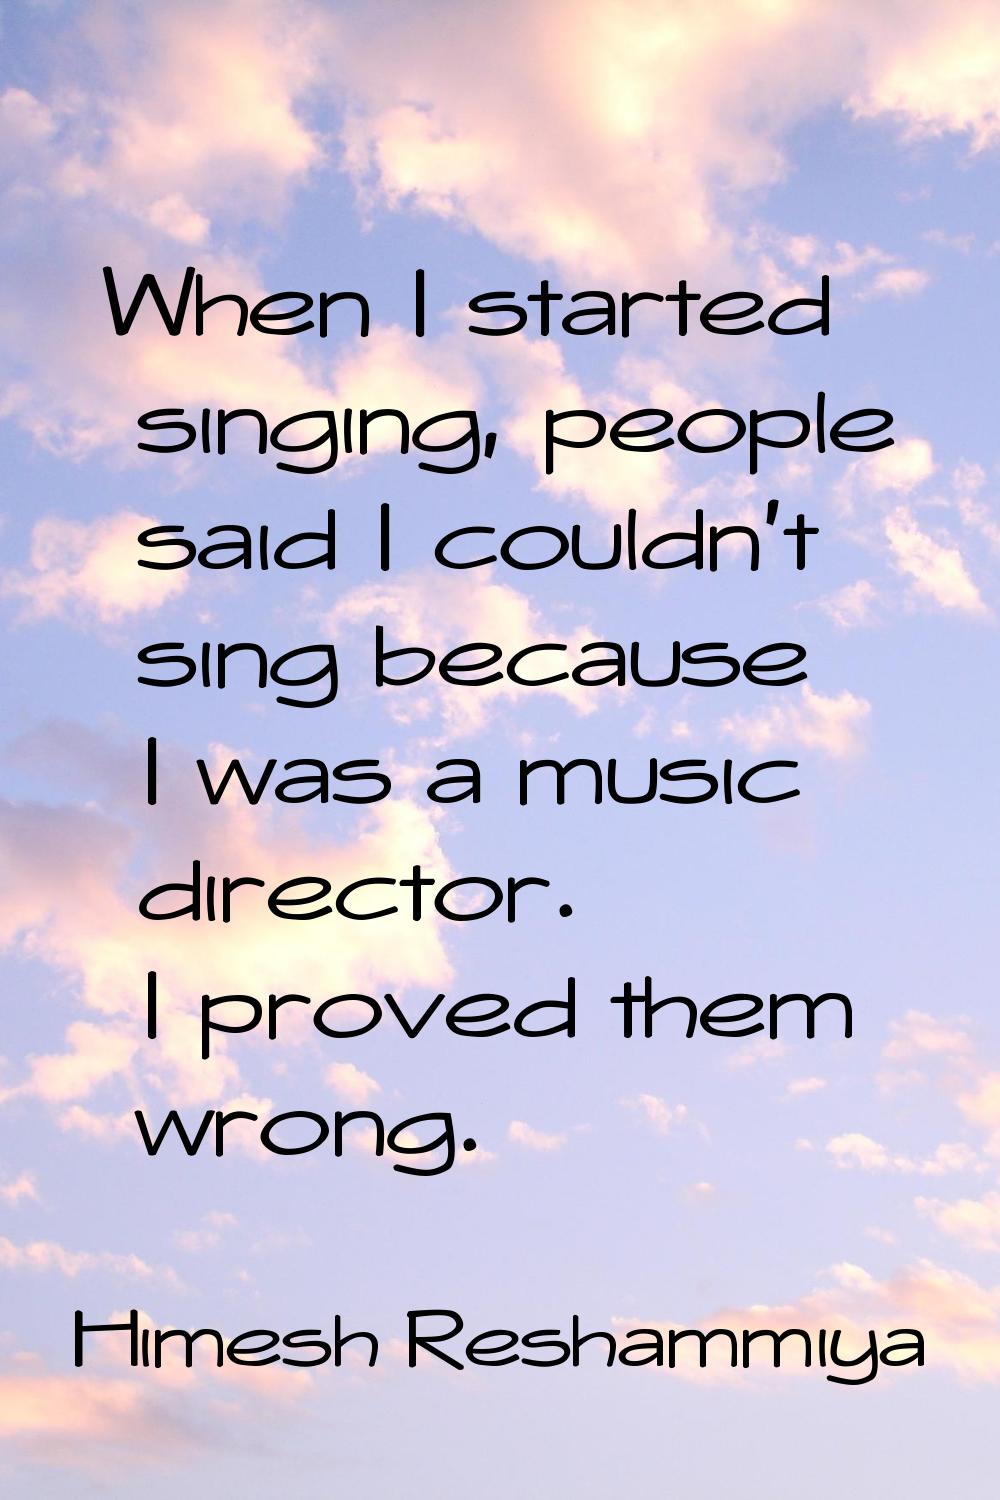 When I started singing, people said I couldn't sing because I was a music director. I proved them w